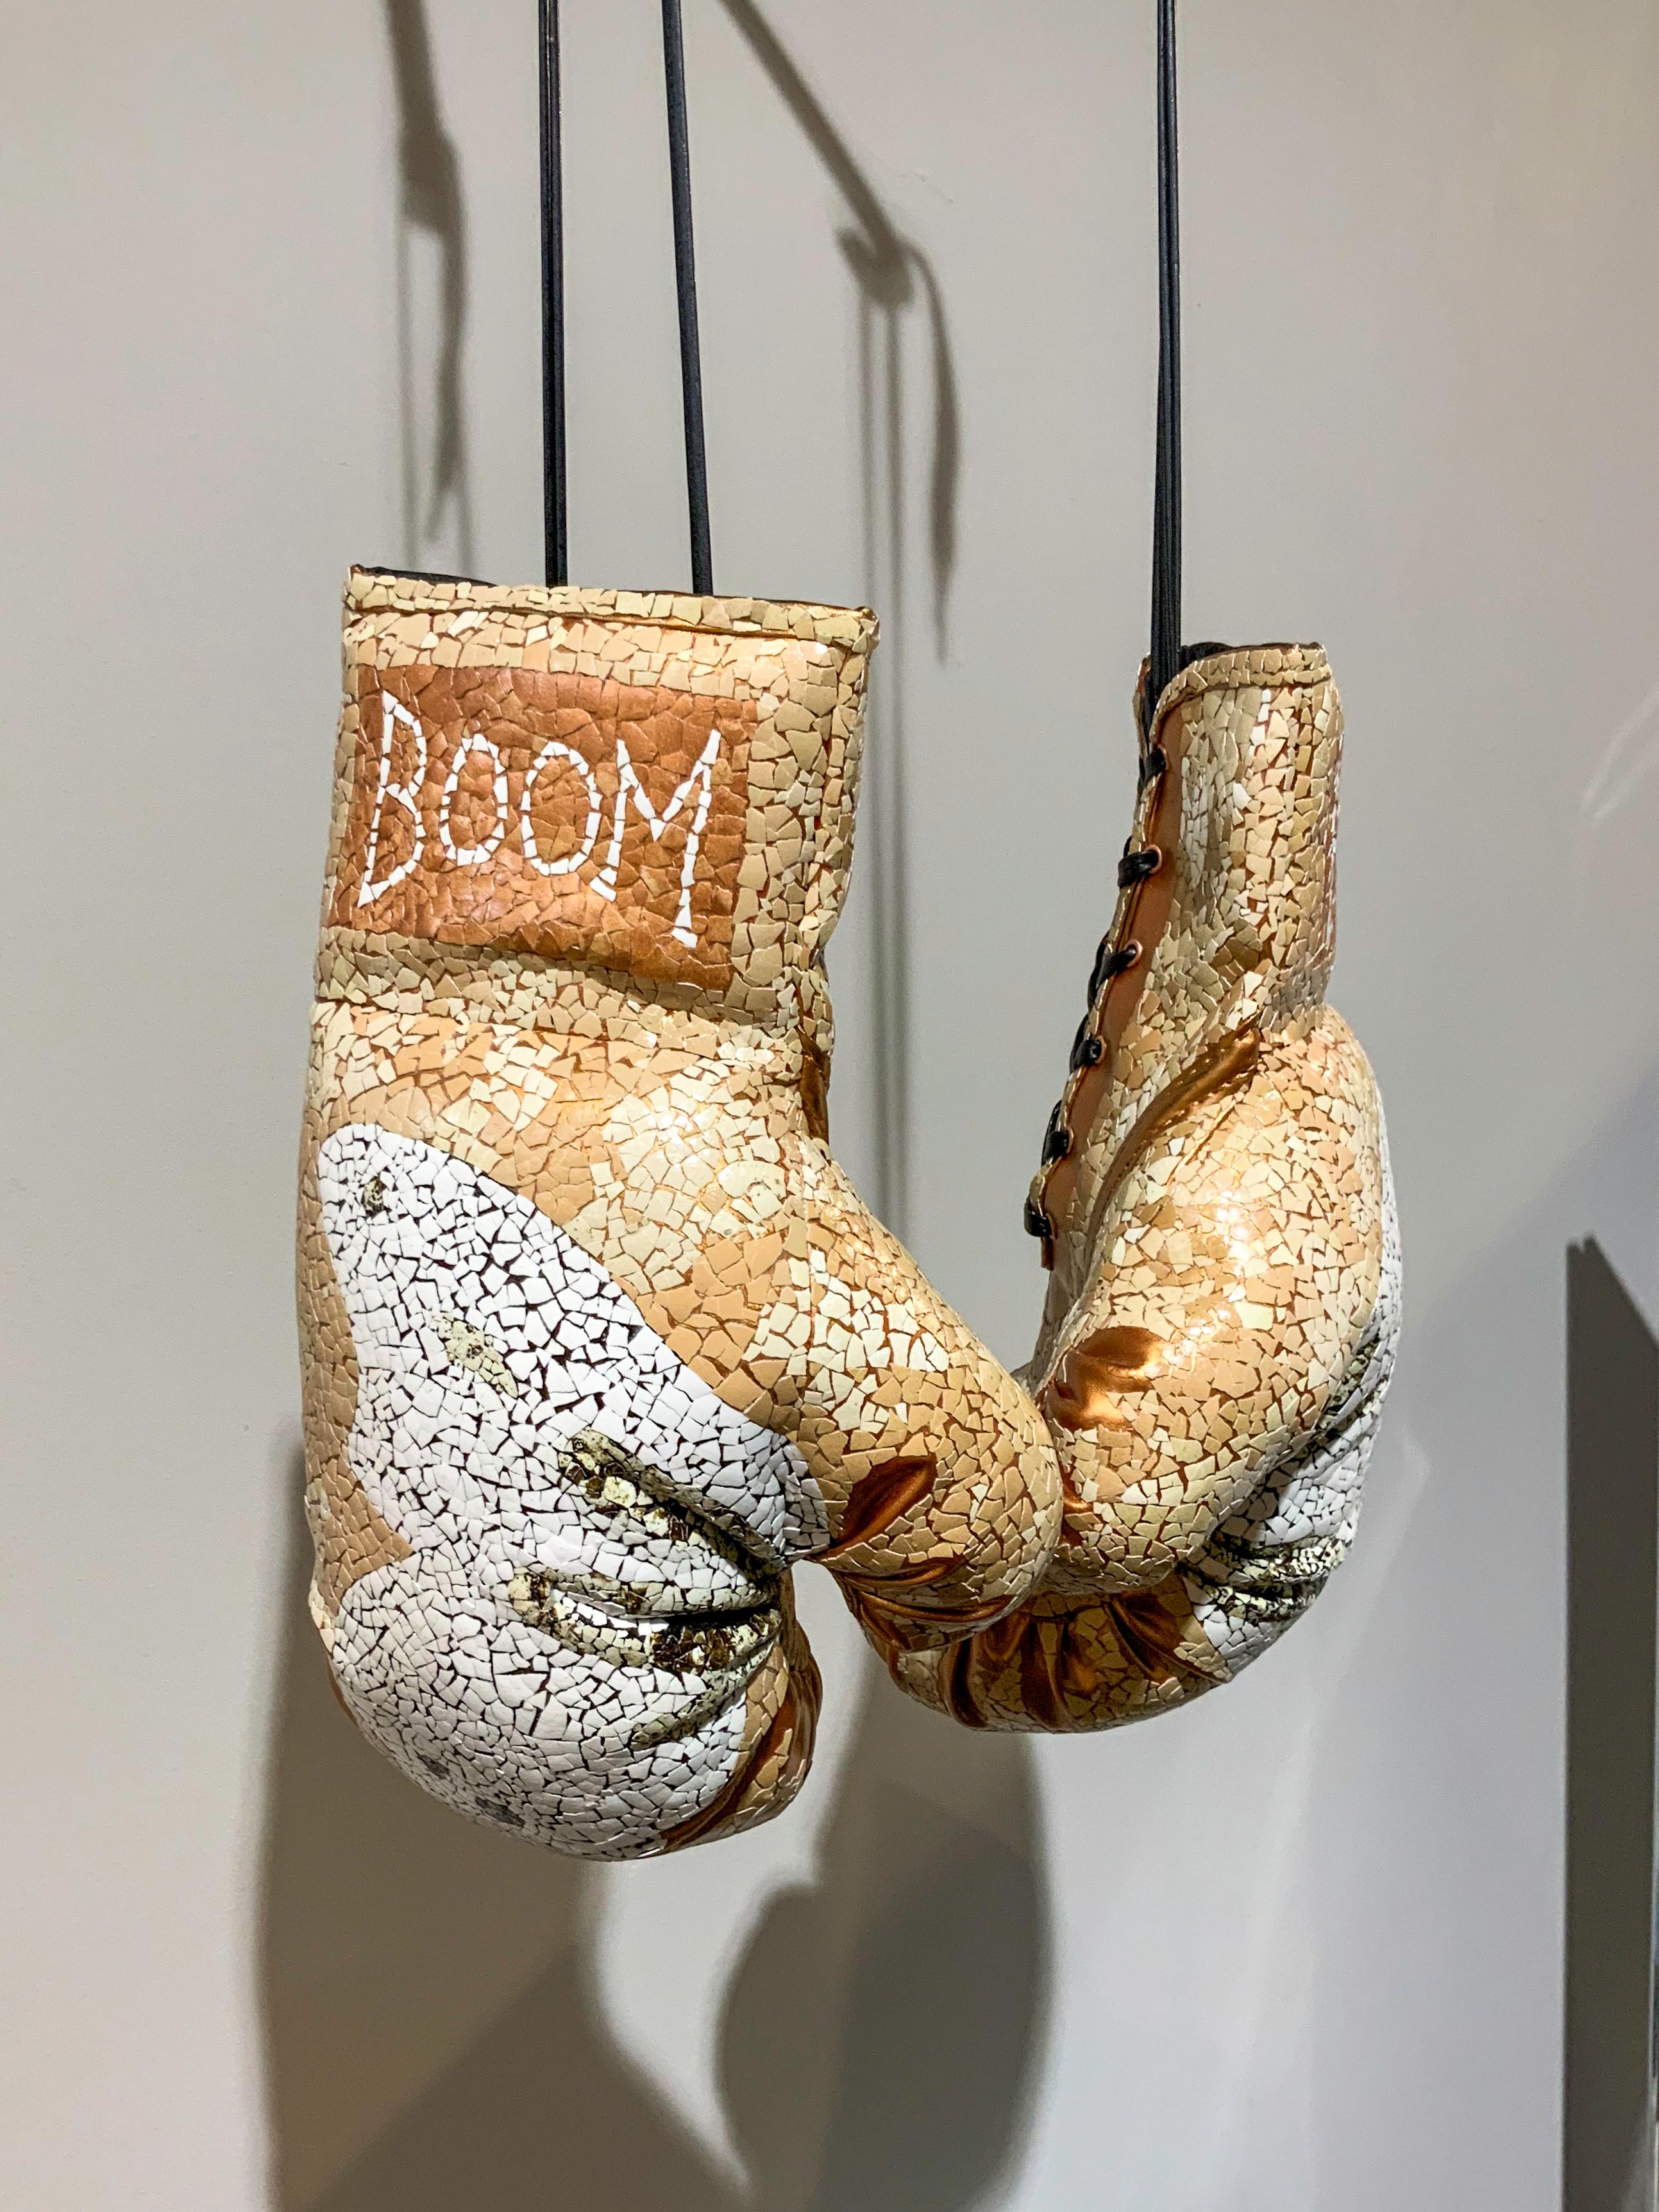 Boom Boom Butterfly- Hand Embellished Boxing Gloves, Mixed Media Sculpture - Contemporary Mixed Media Art by MyLoan Dinh